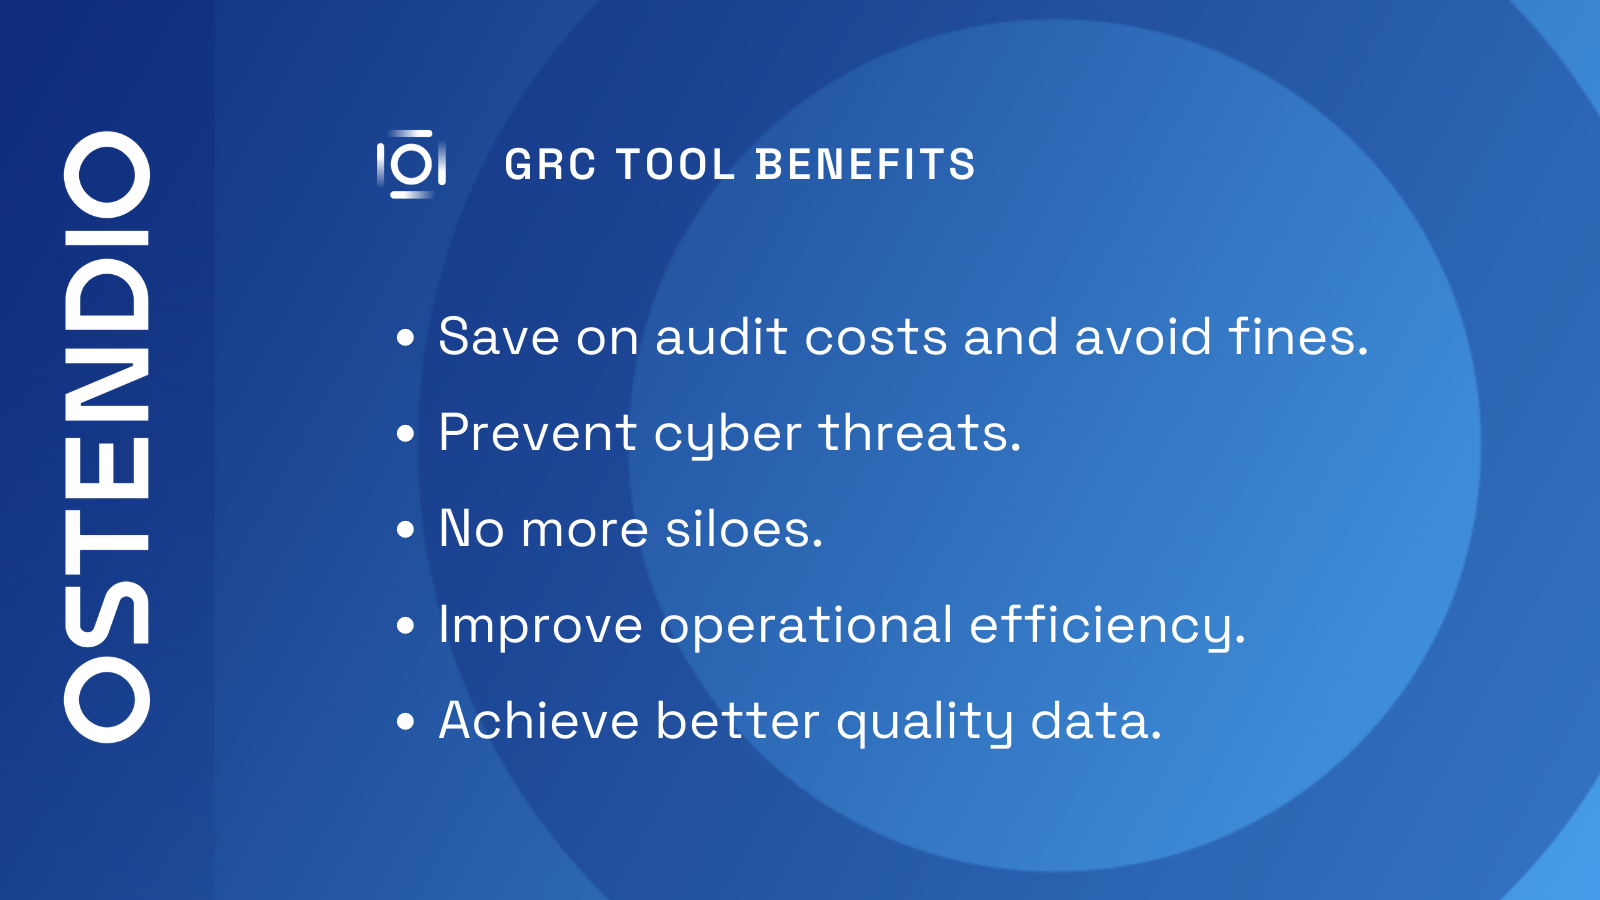 The benefits of a GRC tool